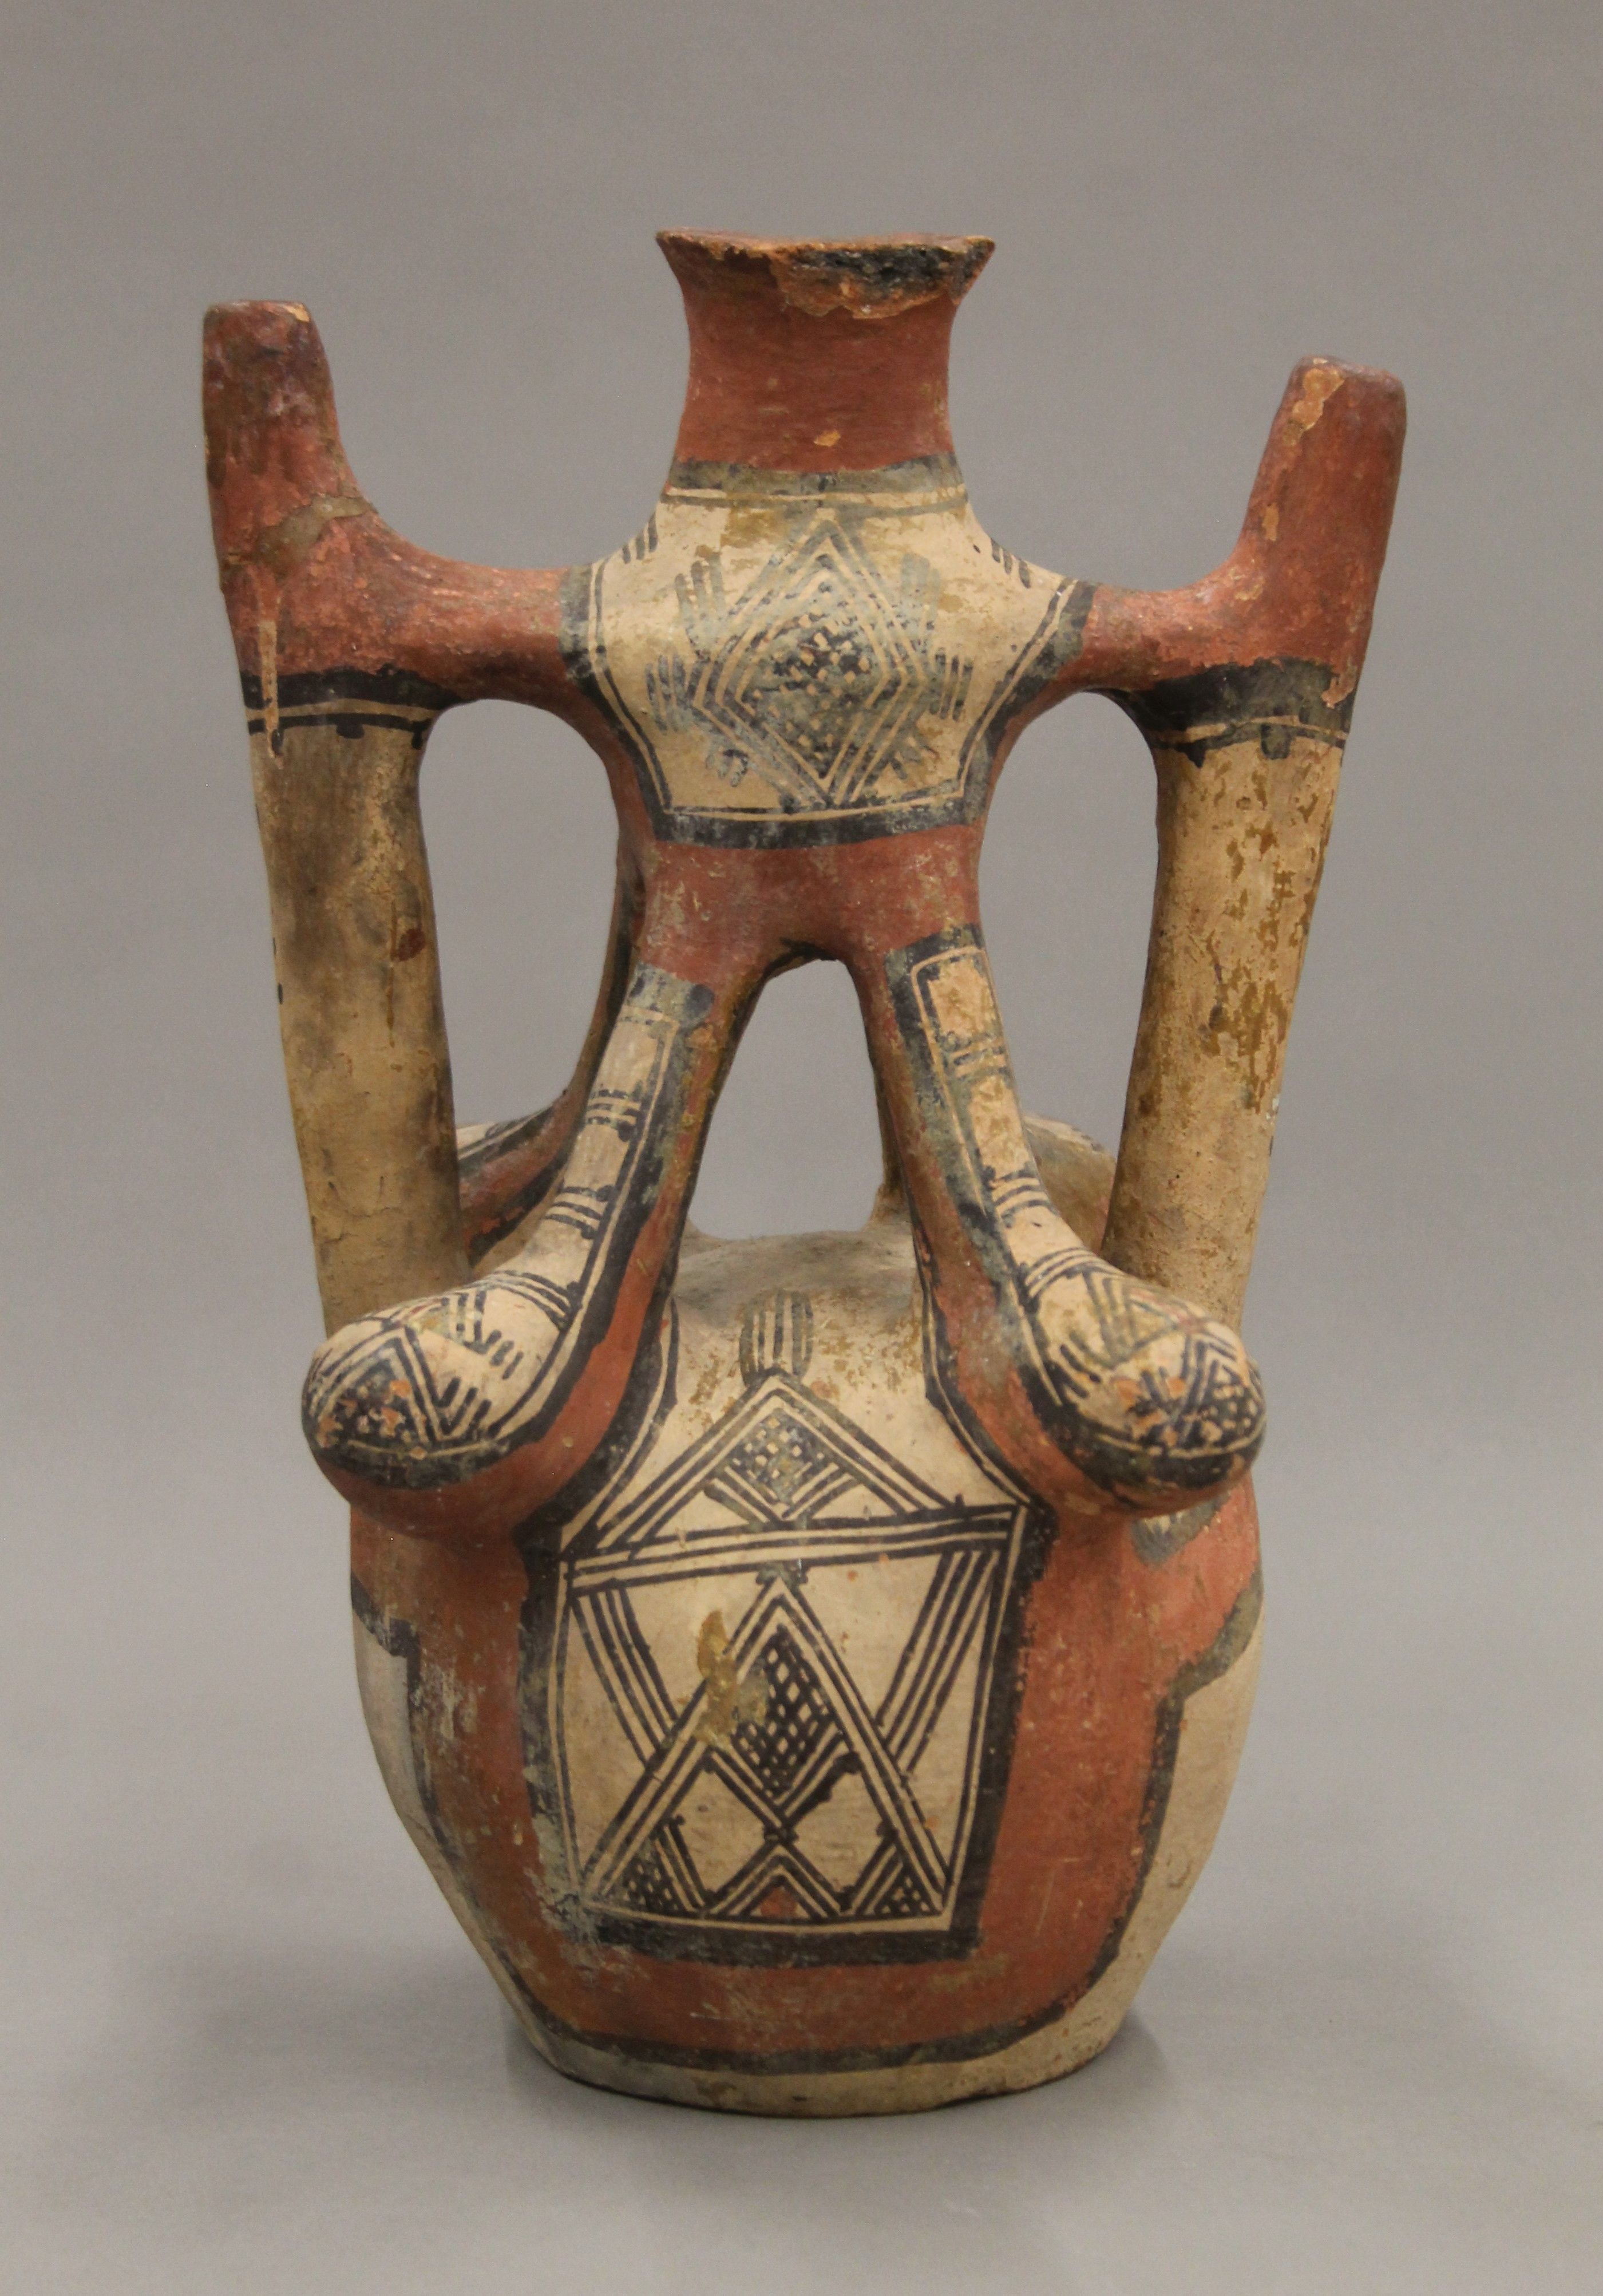 A Kabyle jug (part of the Berber people of Algeria). - Image 2 of 4